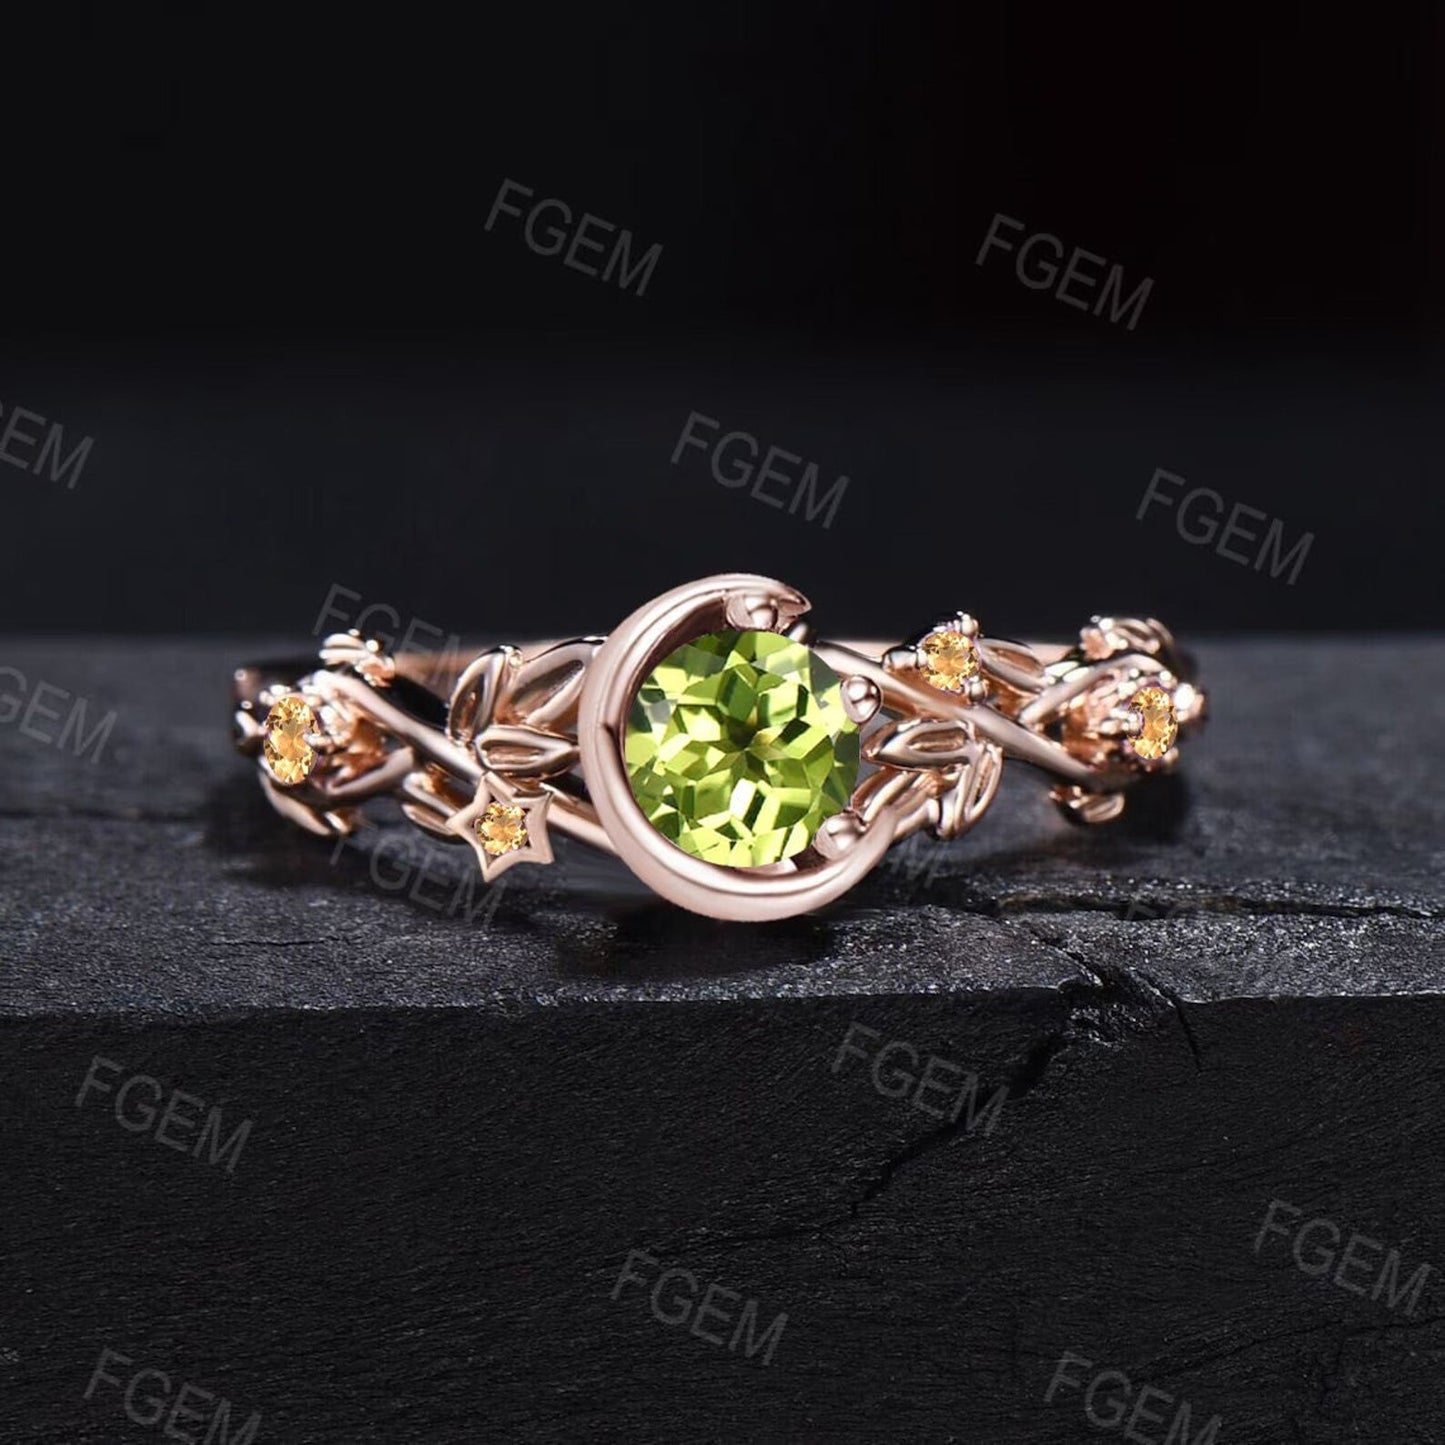 Moon Star Design Natural Peridot and Citrine Ring 10K Rose Gold Nature Inspired Green Peridot Promise Ring August Birthstone Birthday Gifts